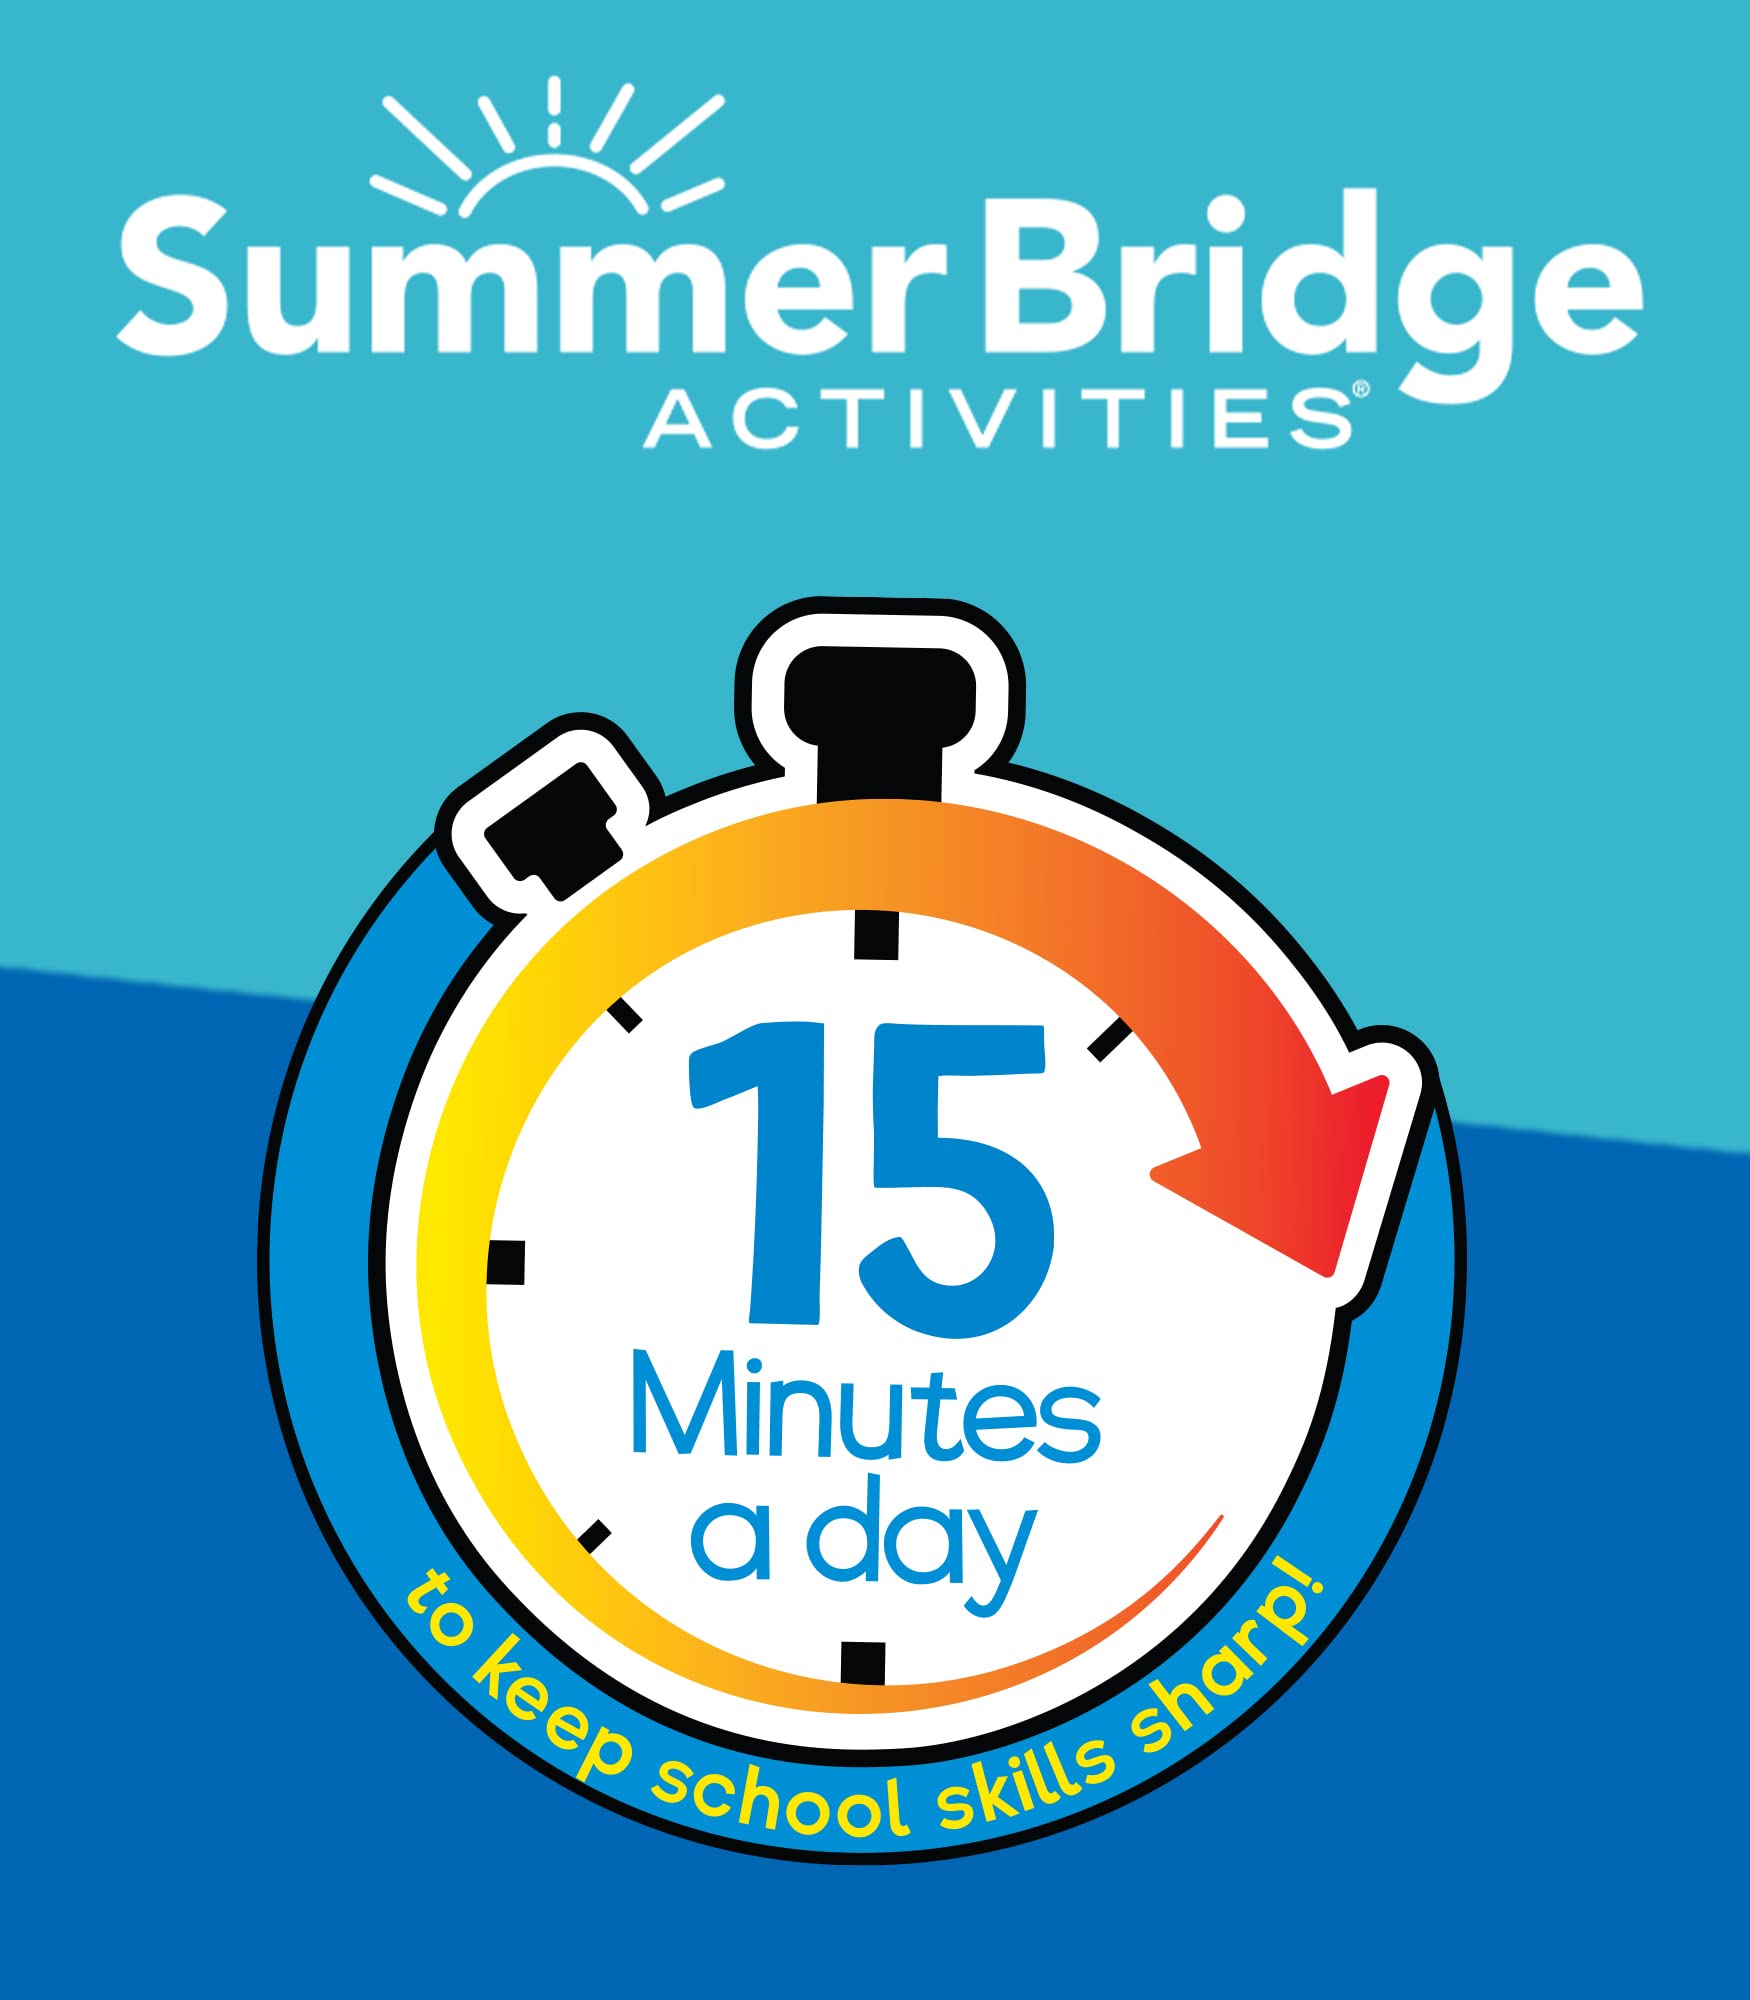 Summer Bridge Activities 4th to 5th Grade Workbook, Math, Reading Comprehension, Writing, Science, Social Studies, Fitness Summer Learning Activities, 5th Grade Workbooks All Subjects With Flash Cards